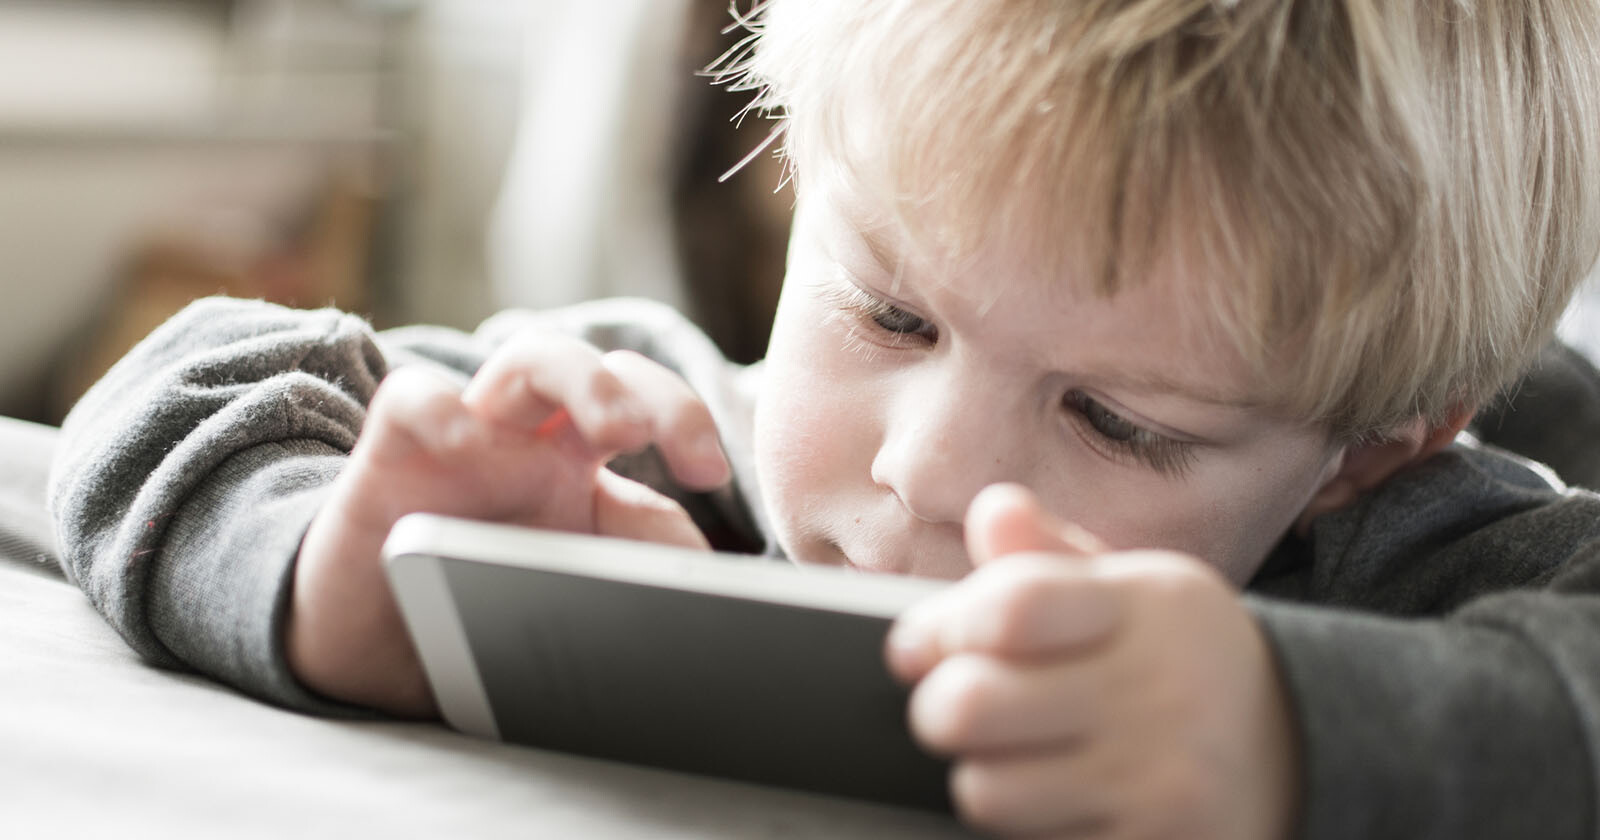  report reveals how children are watching two videos 